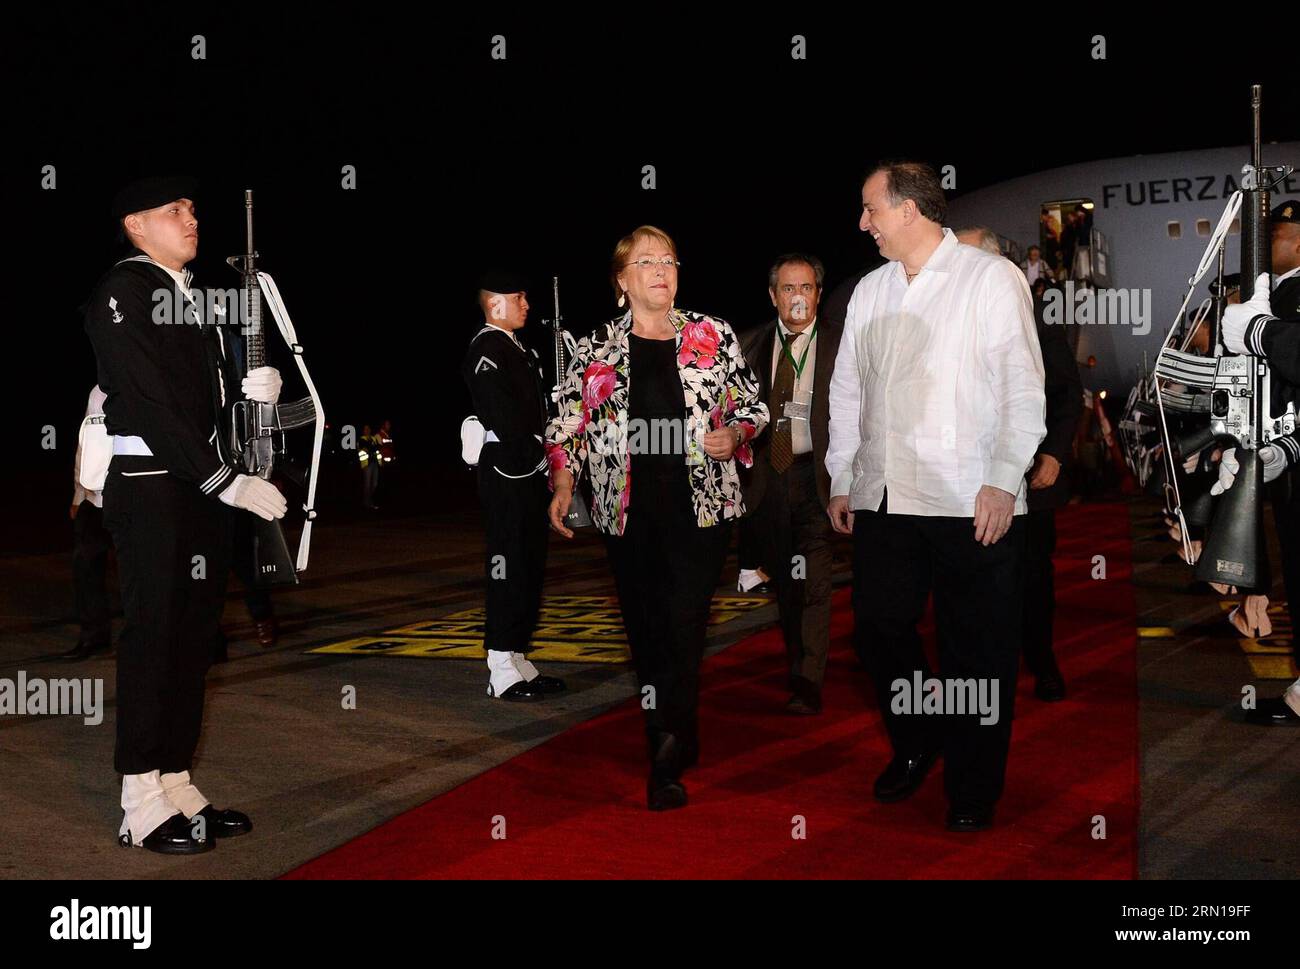 (141208) -- VERACRUZ,   Image provided by shows Chilean President Michelle Bachelet (2-L-Front) and Mexican Foreign Affairs Secretary Jose Antonio Meade Kuribrena (R-Front) talking after Bachelet s arrival to Heriberto Jara Corona International Airport in Veracruz, Mexico, on Dec. 7, 2014. Bachelet arrived in Veracruz to participate in the 24th Ibero-American Summit, according to the local press. ) (zjy) MEXICO-VERACRUZ-CHILE-POLITICS-SUMMIT CHILE SxPRESIDENCY PUBLICATIONxNOTxINxCHN   Veracruz Image provided by Shows Chilean President Michelle Bachelet 2 l Front and MEXICAN Foreign Affairs Sec Stock Photo